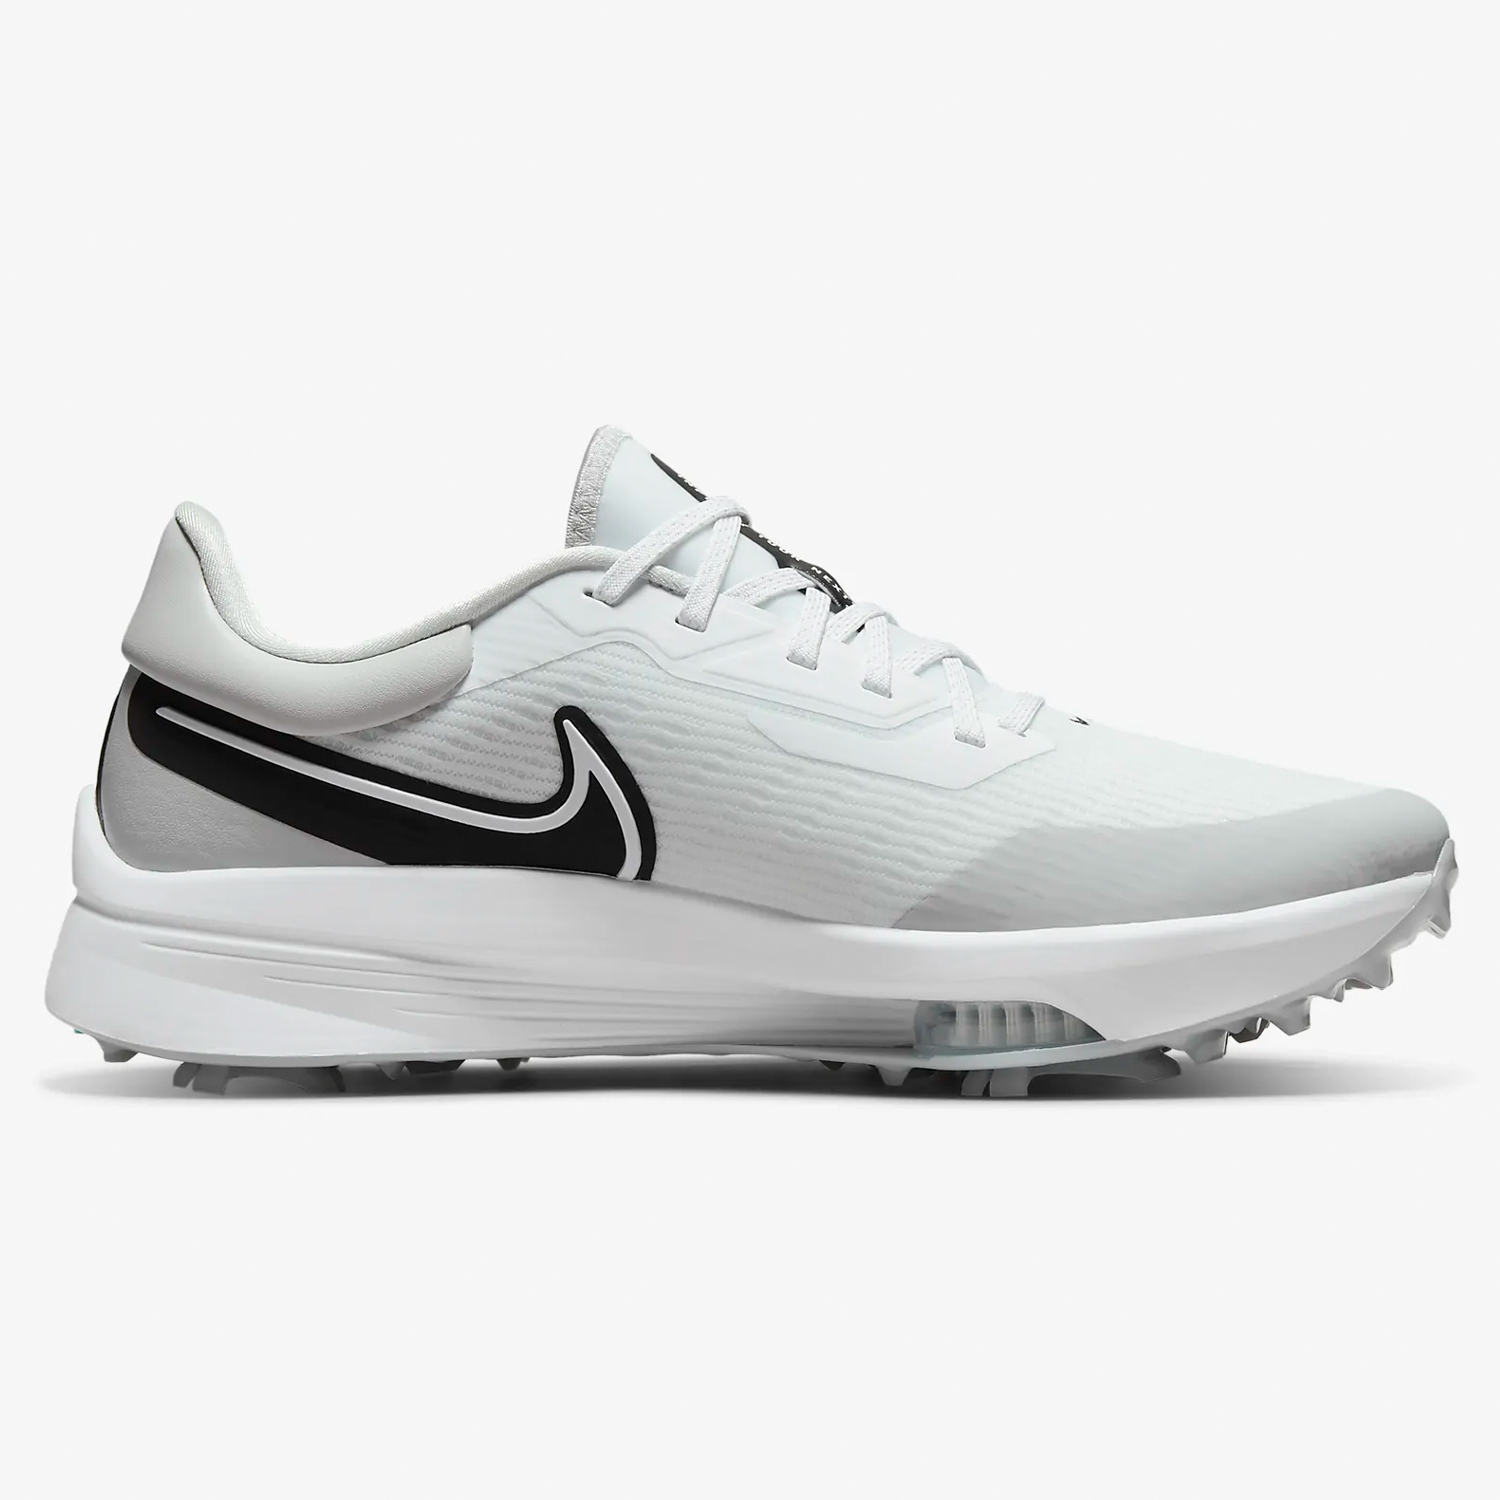 Nike Golf Air Zoom Infinity Tour Next% Golf Shoes | Scratch72